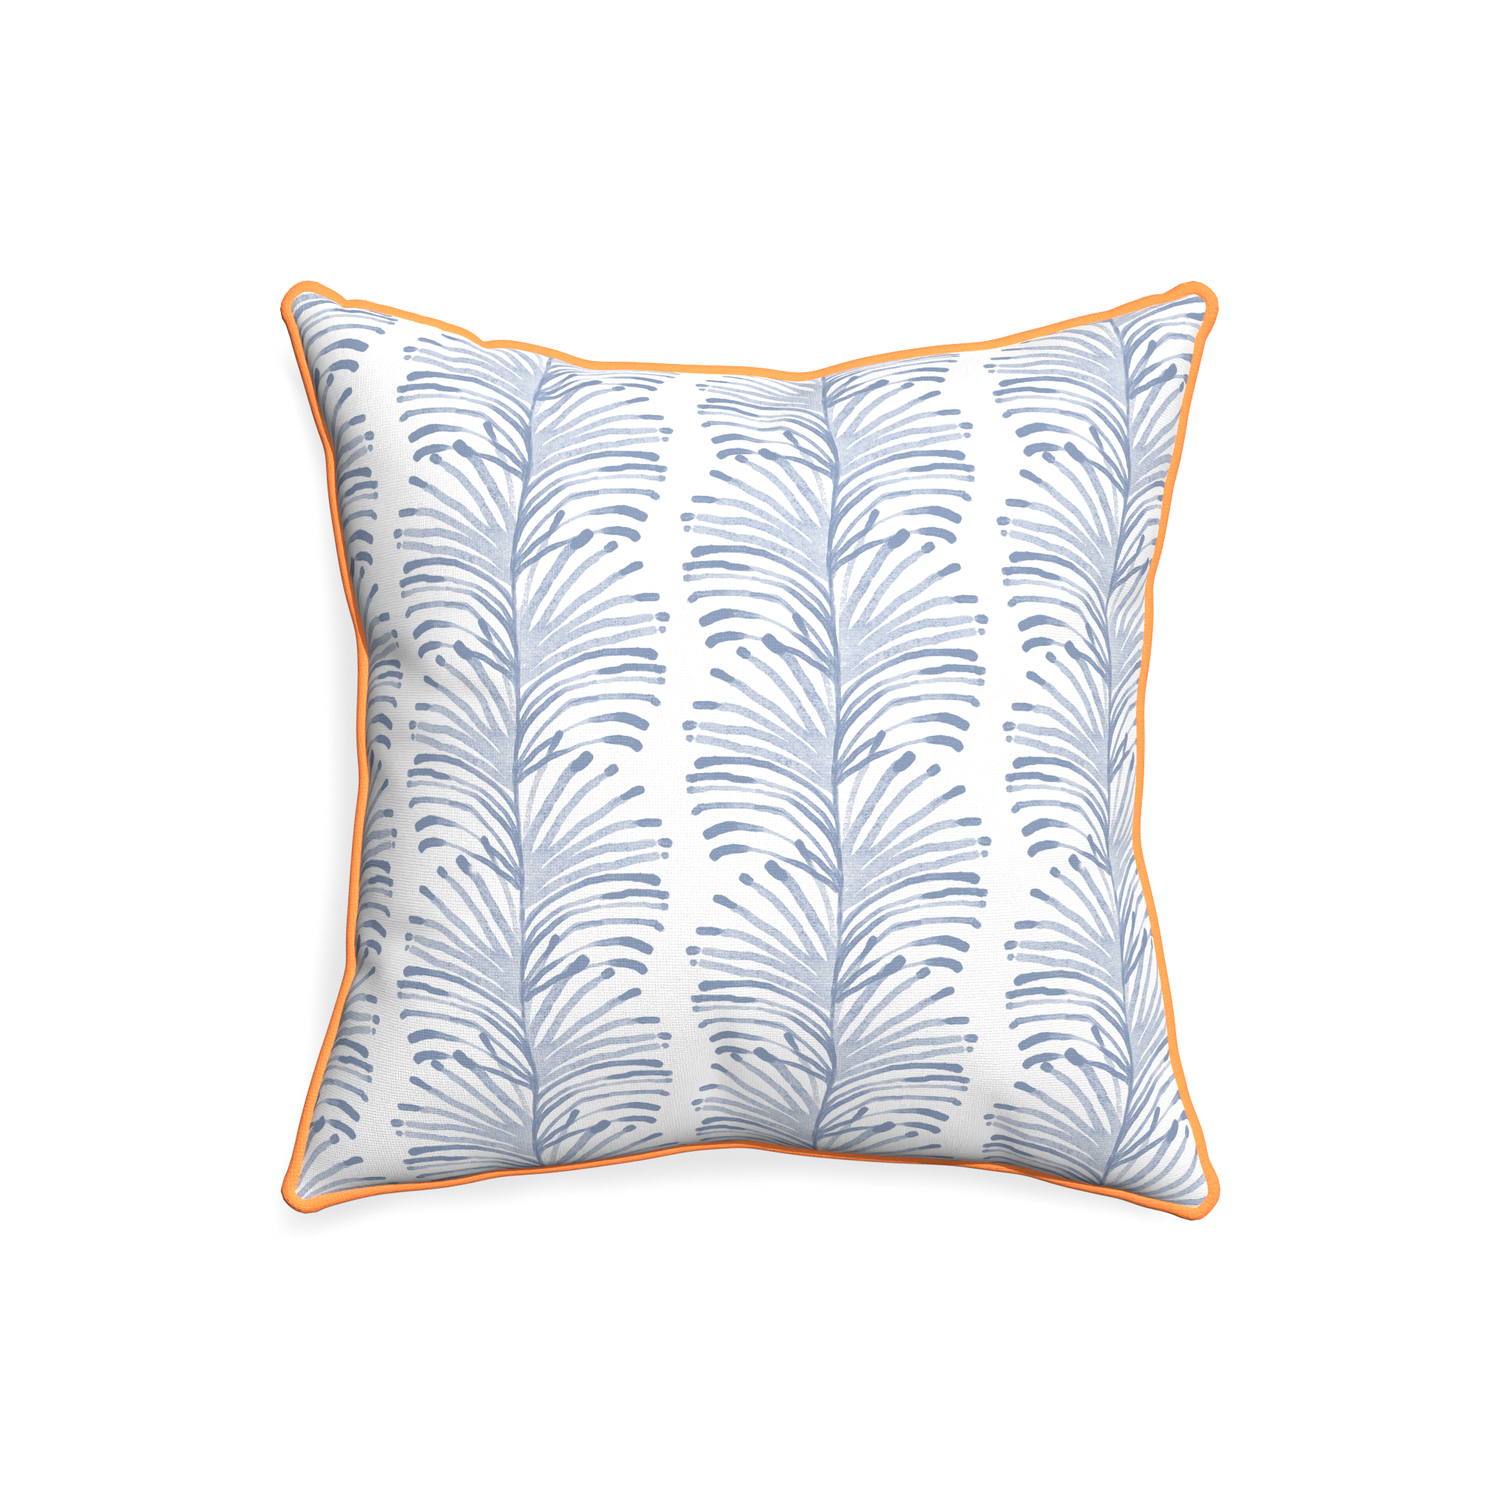 20-square emma sky custom sky blue botanical stripepillow with clementine piping on white background